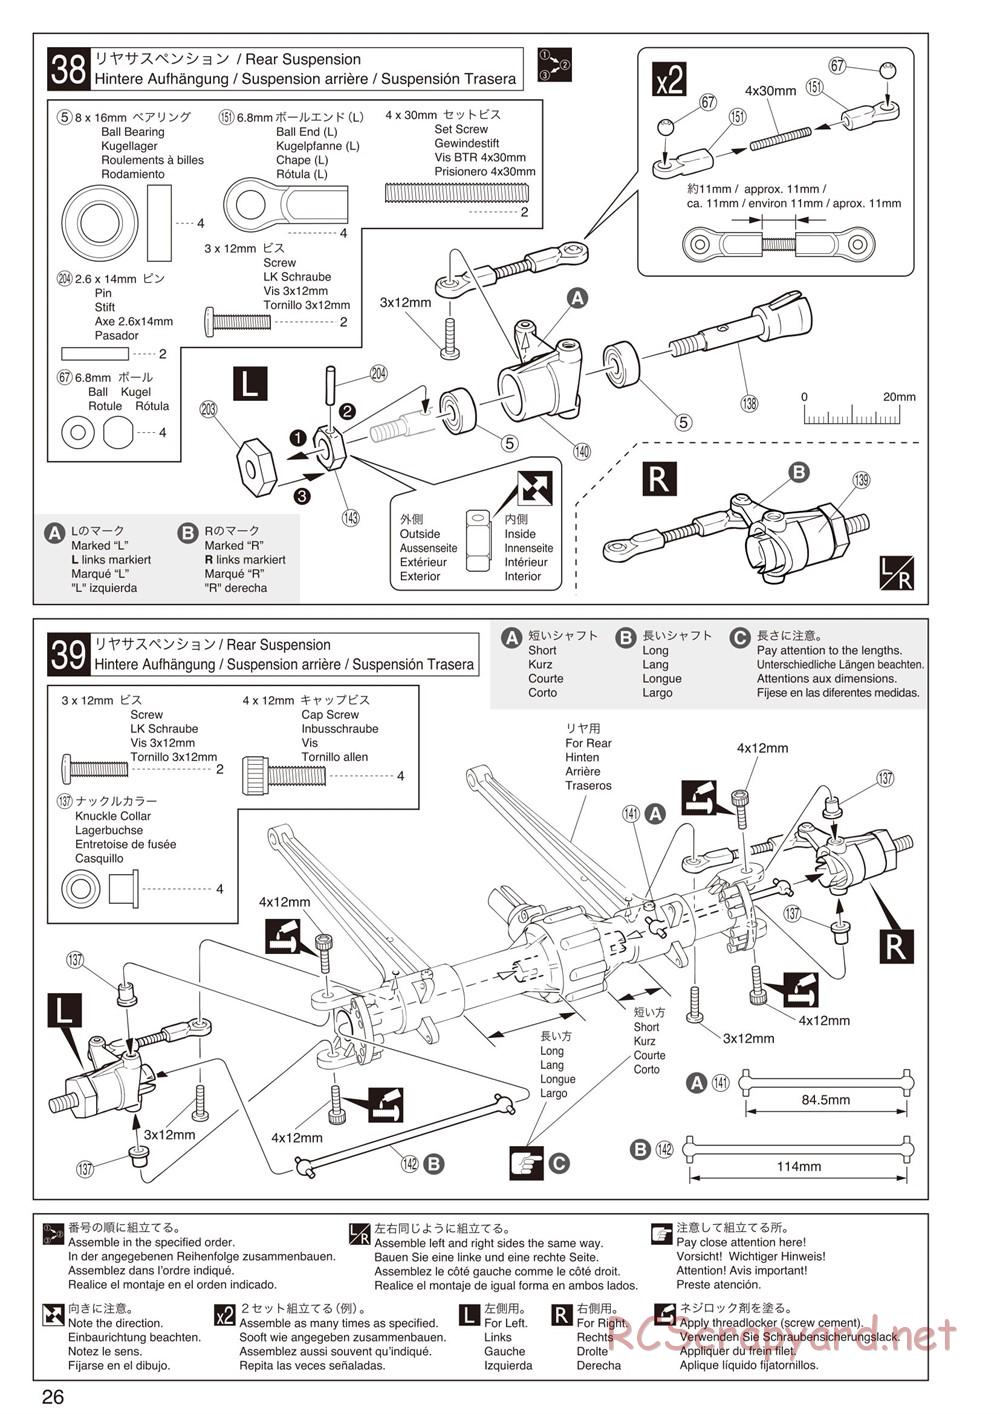 Kyosho - Mad Force Cruiser - Manual - Page 26